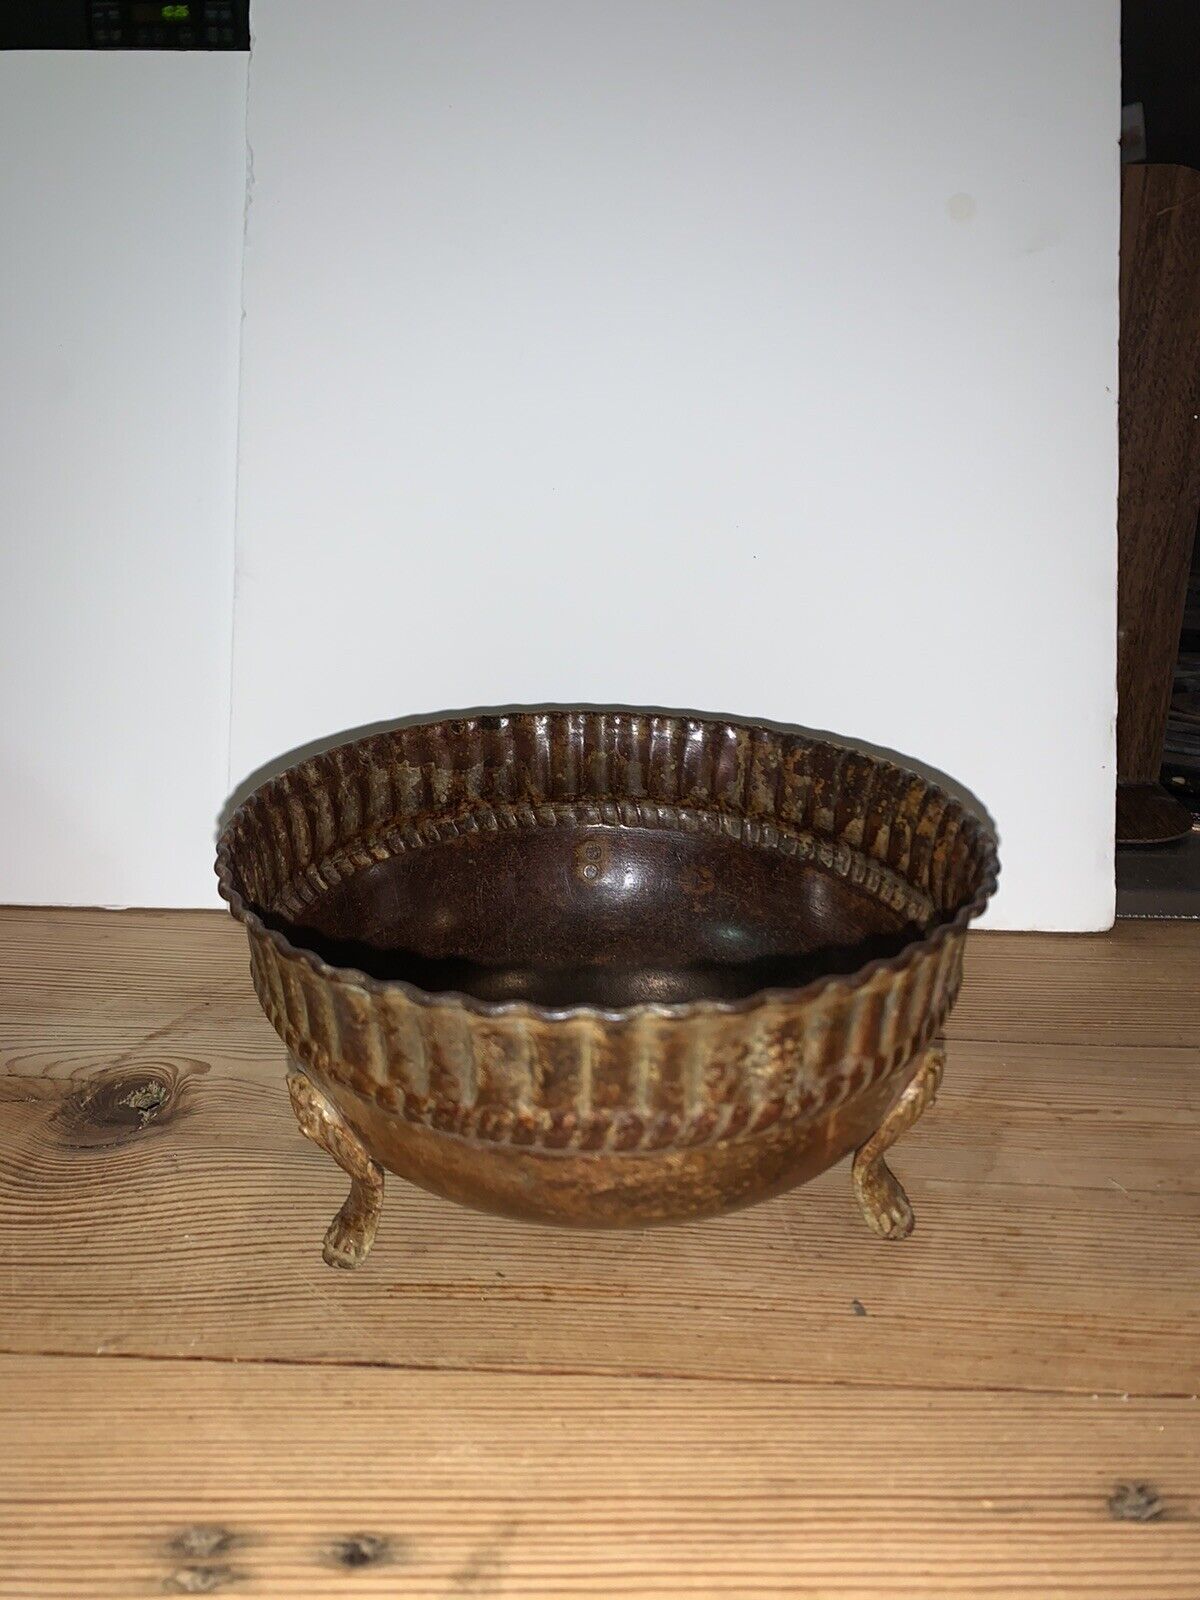 Vintage Hosley Brass Circular Planter Pot with Claw Feet. Decorative Only